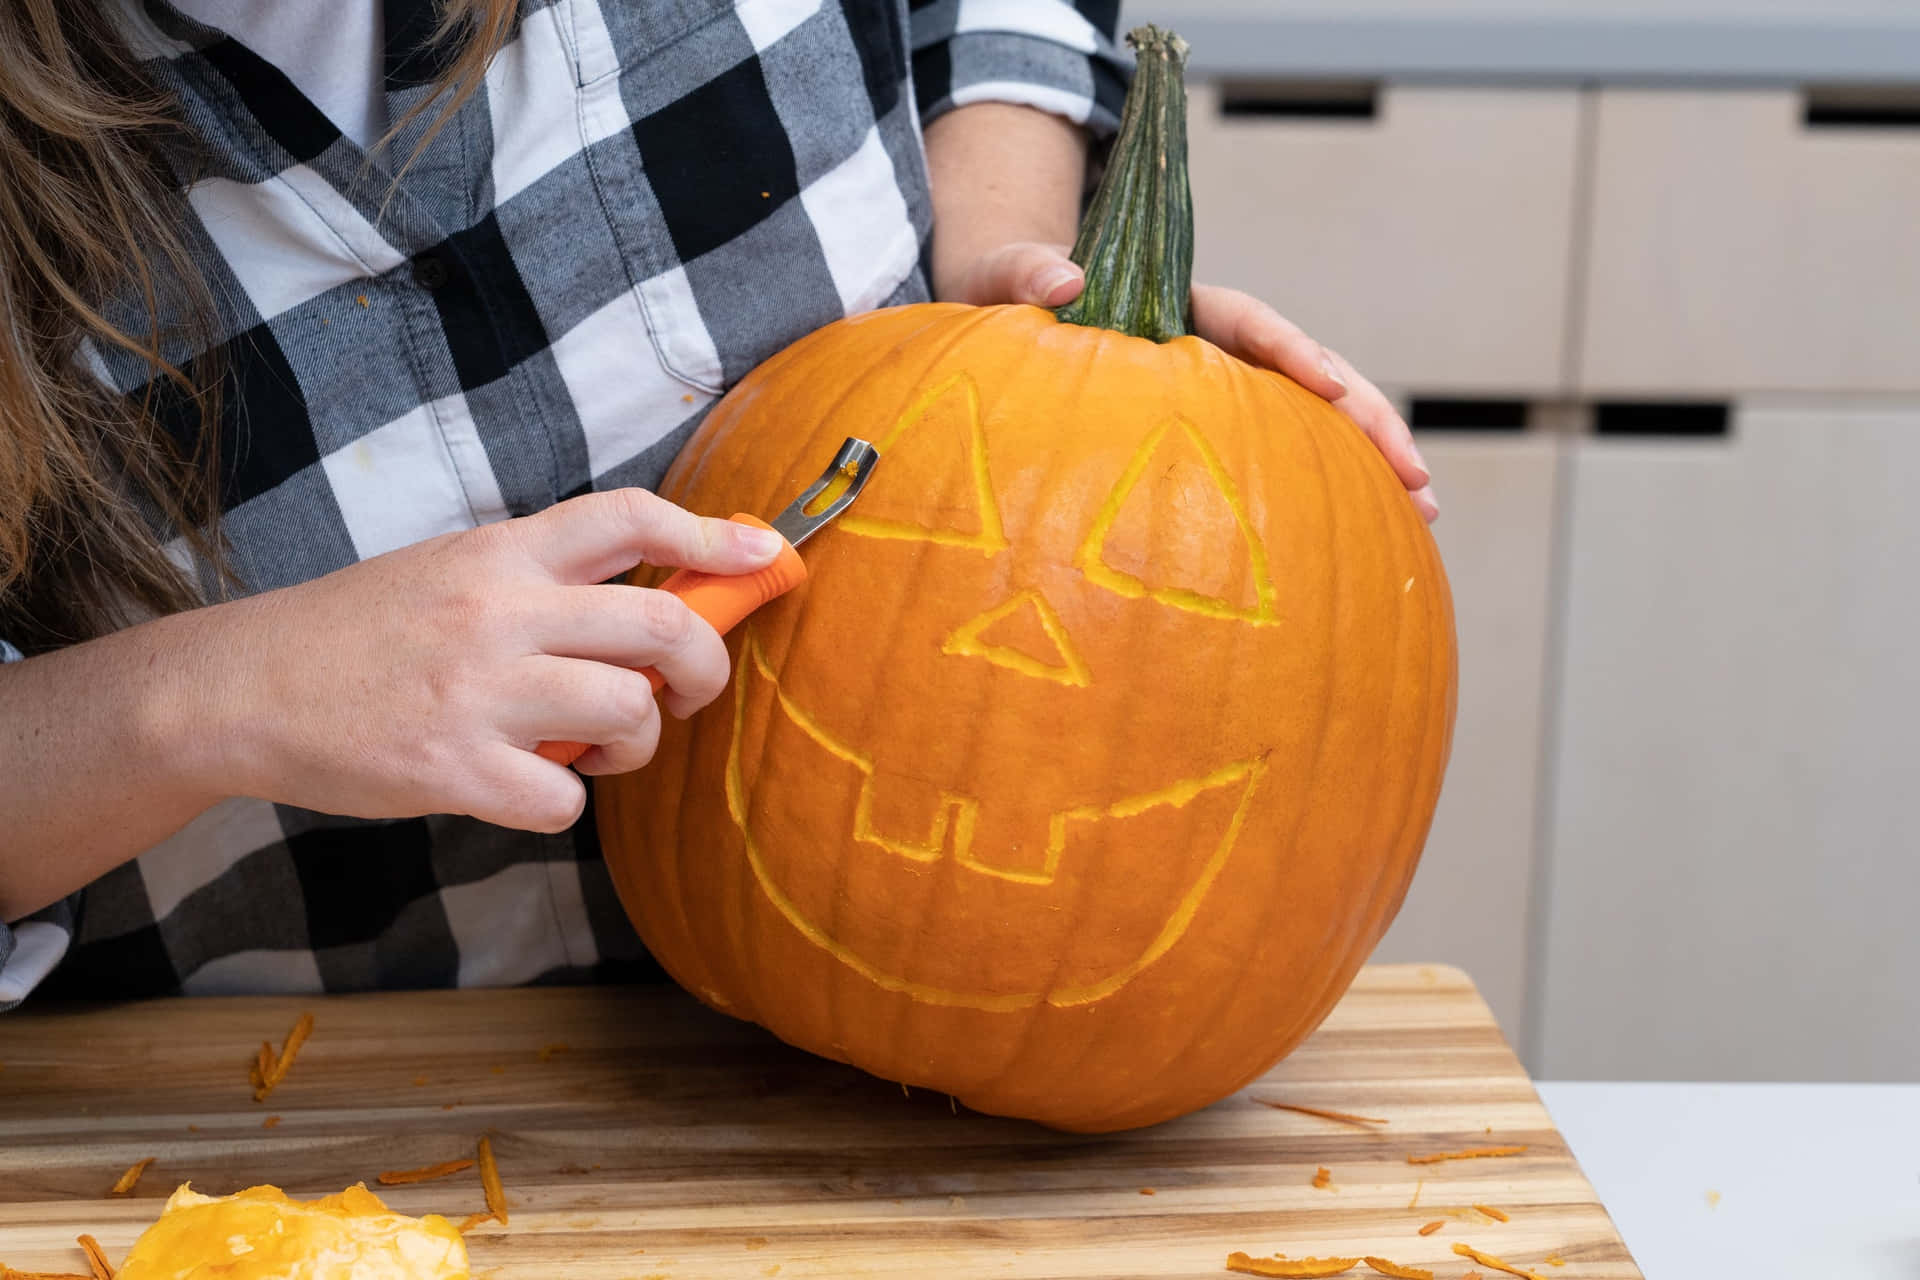 Download Pumpkin Carving Outlining Pictures 2048 x 1365 | Wallpapers.com